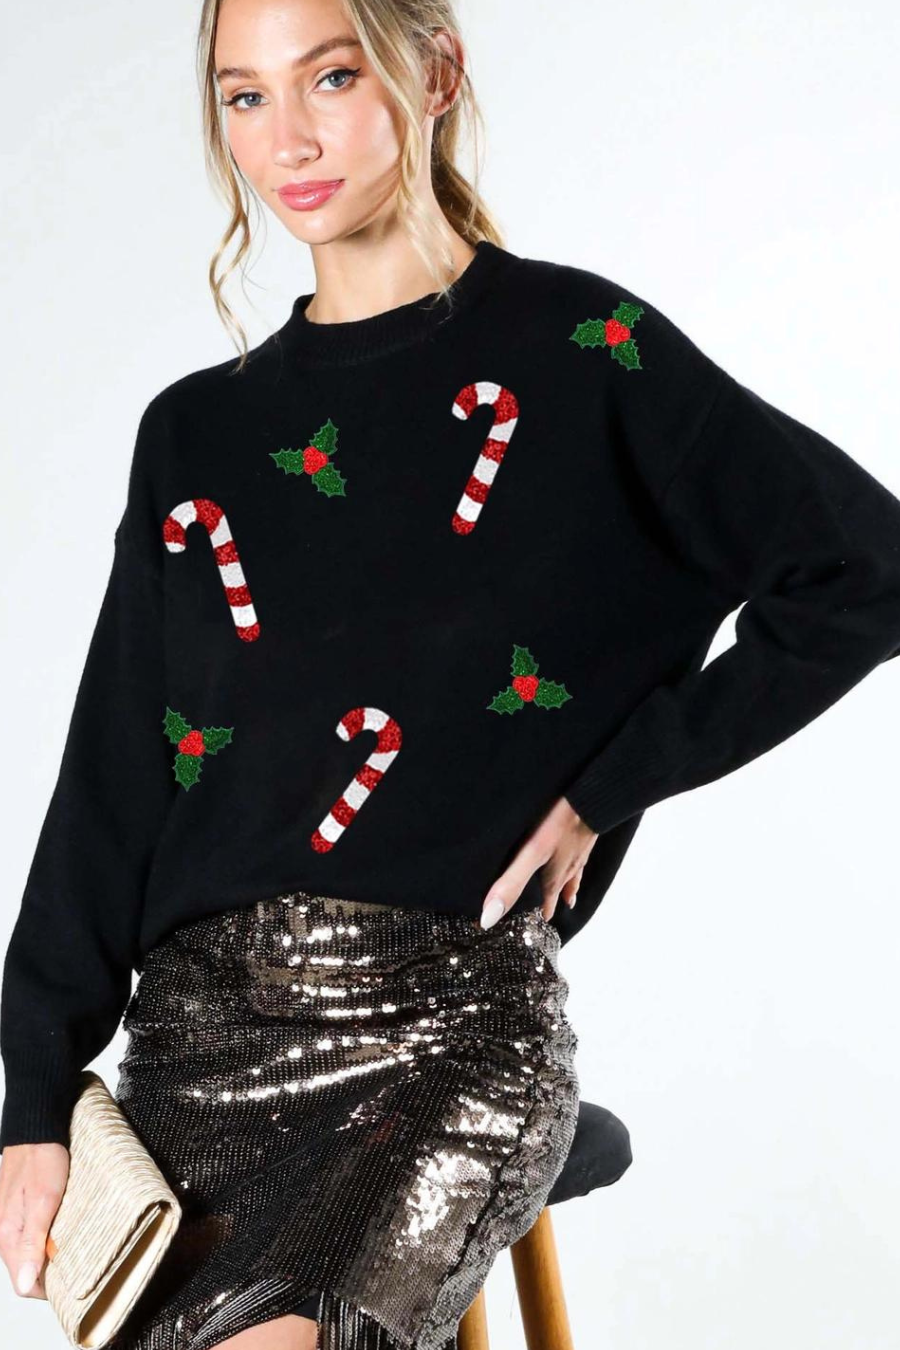 Candy Cane and Mistletoe Holiday Sweater